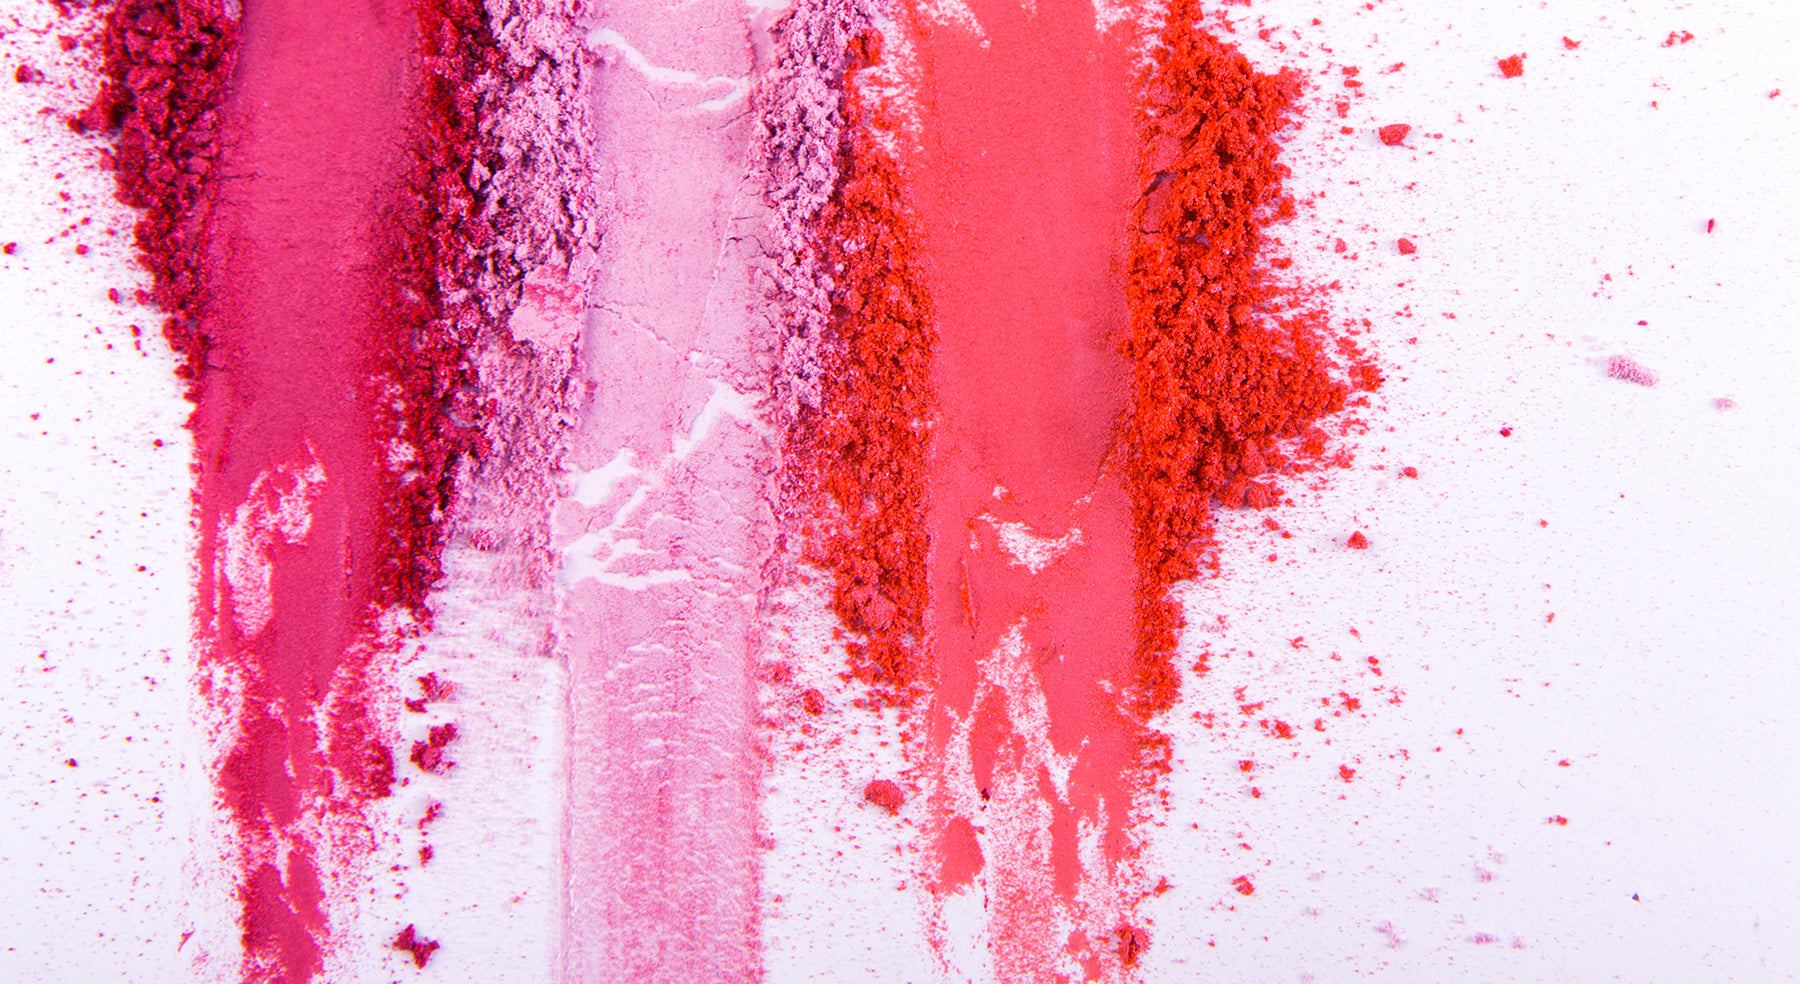 Crushed up makeup powder in different shades of pink